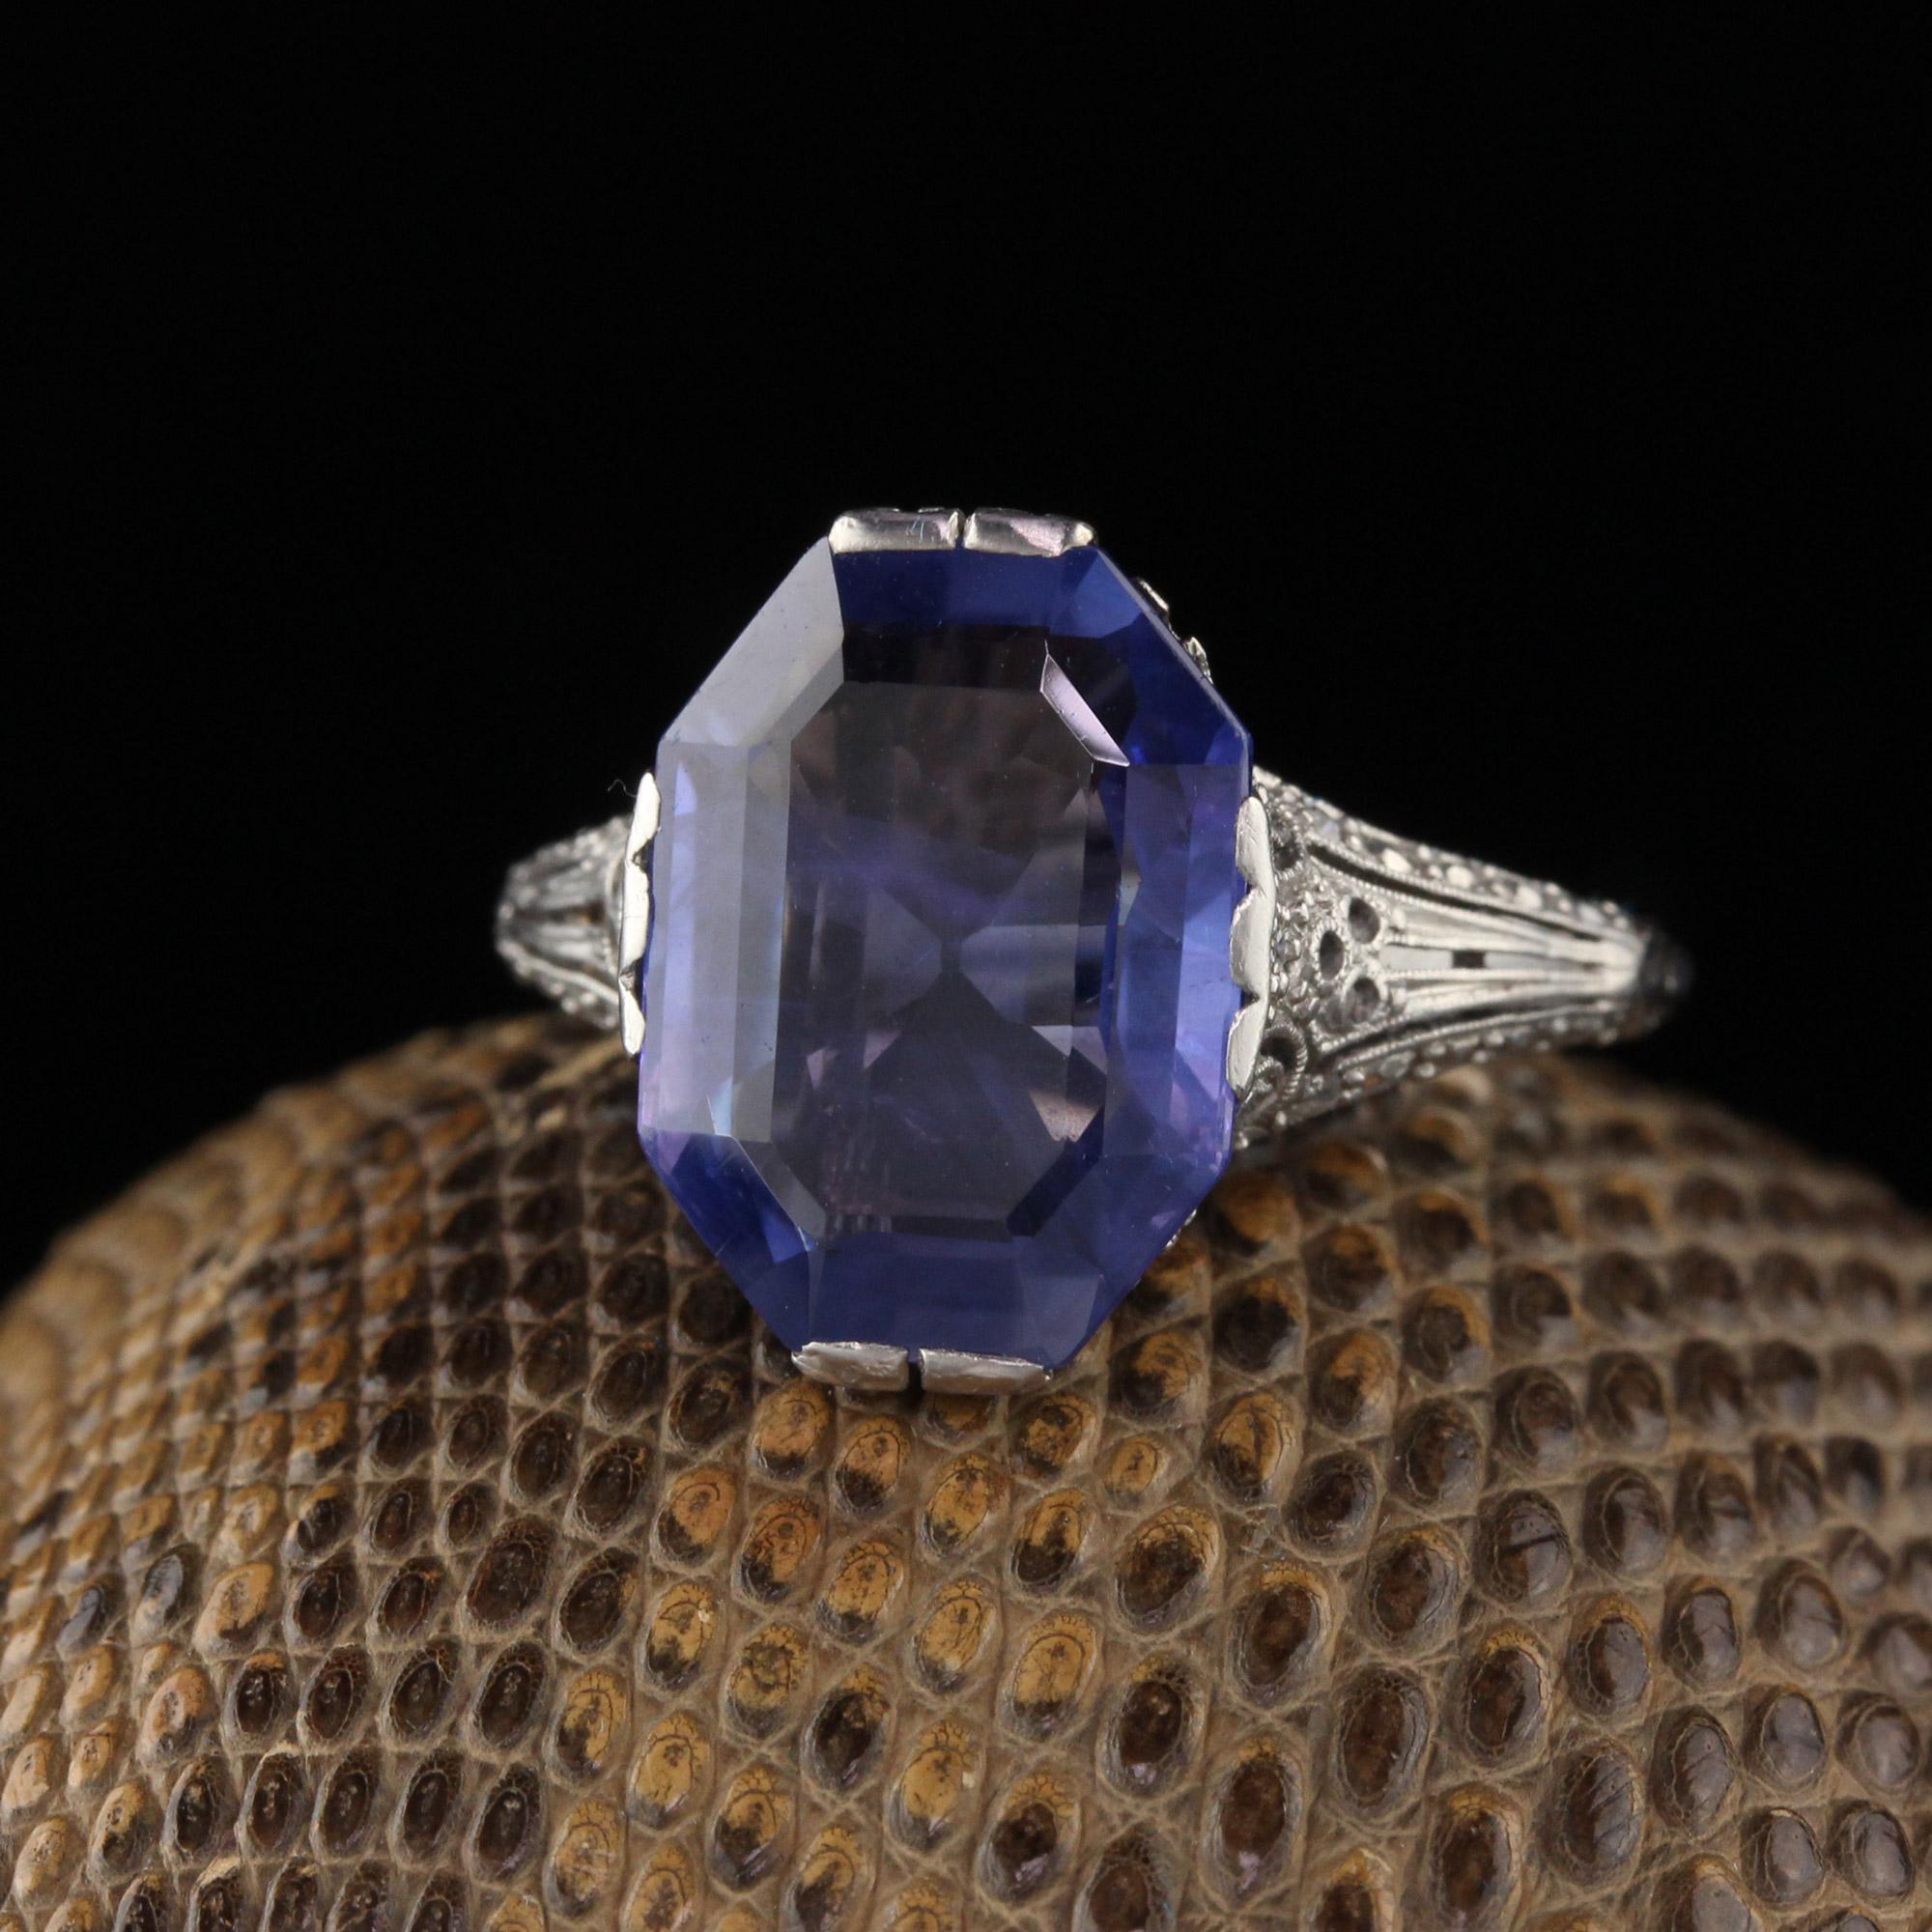 Magnificent Edwardian cocktail ring circa 1914 featuring a GIA certified Ceylon no-heat color change sapphire in a gorgeous platinum and diamond mounting. The sapphire is a really beautiful color and unique because it's an original old cut original